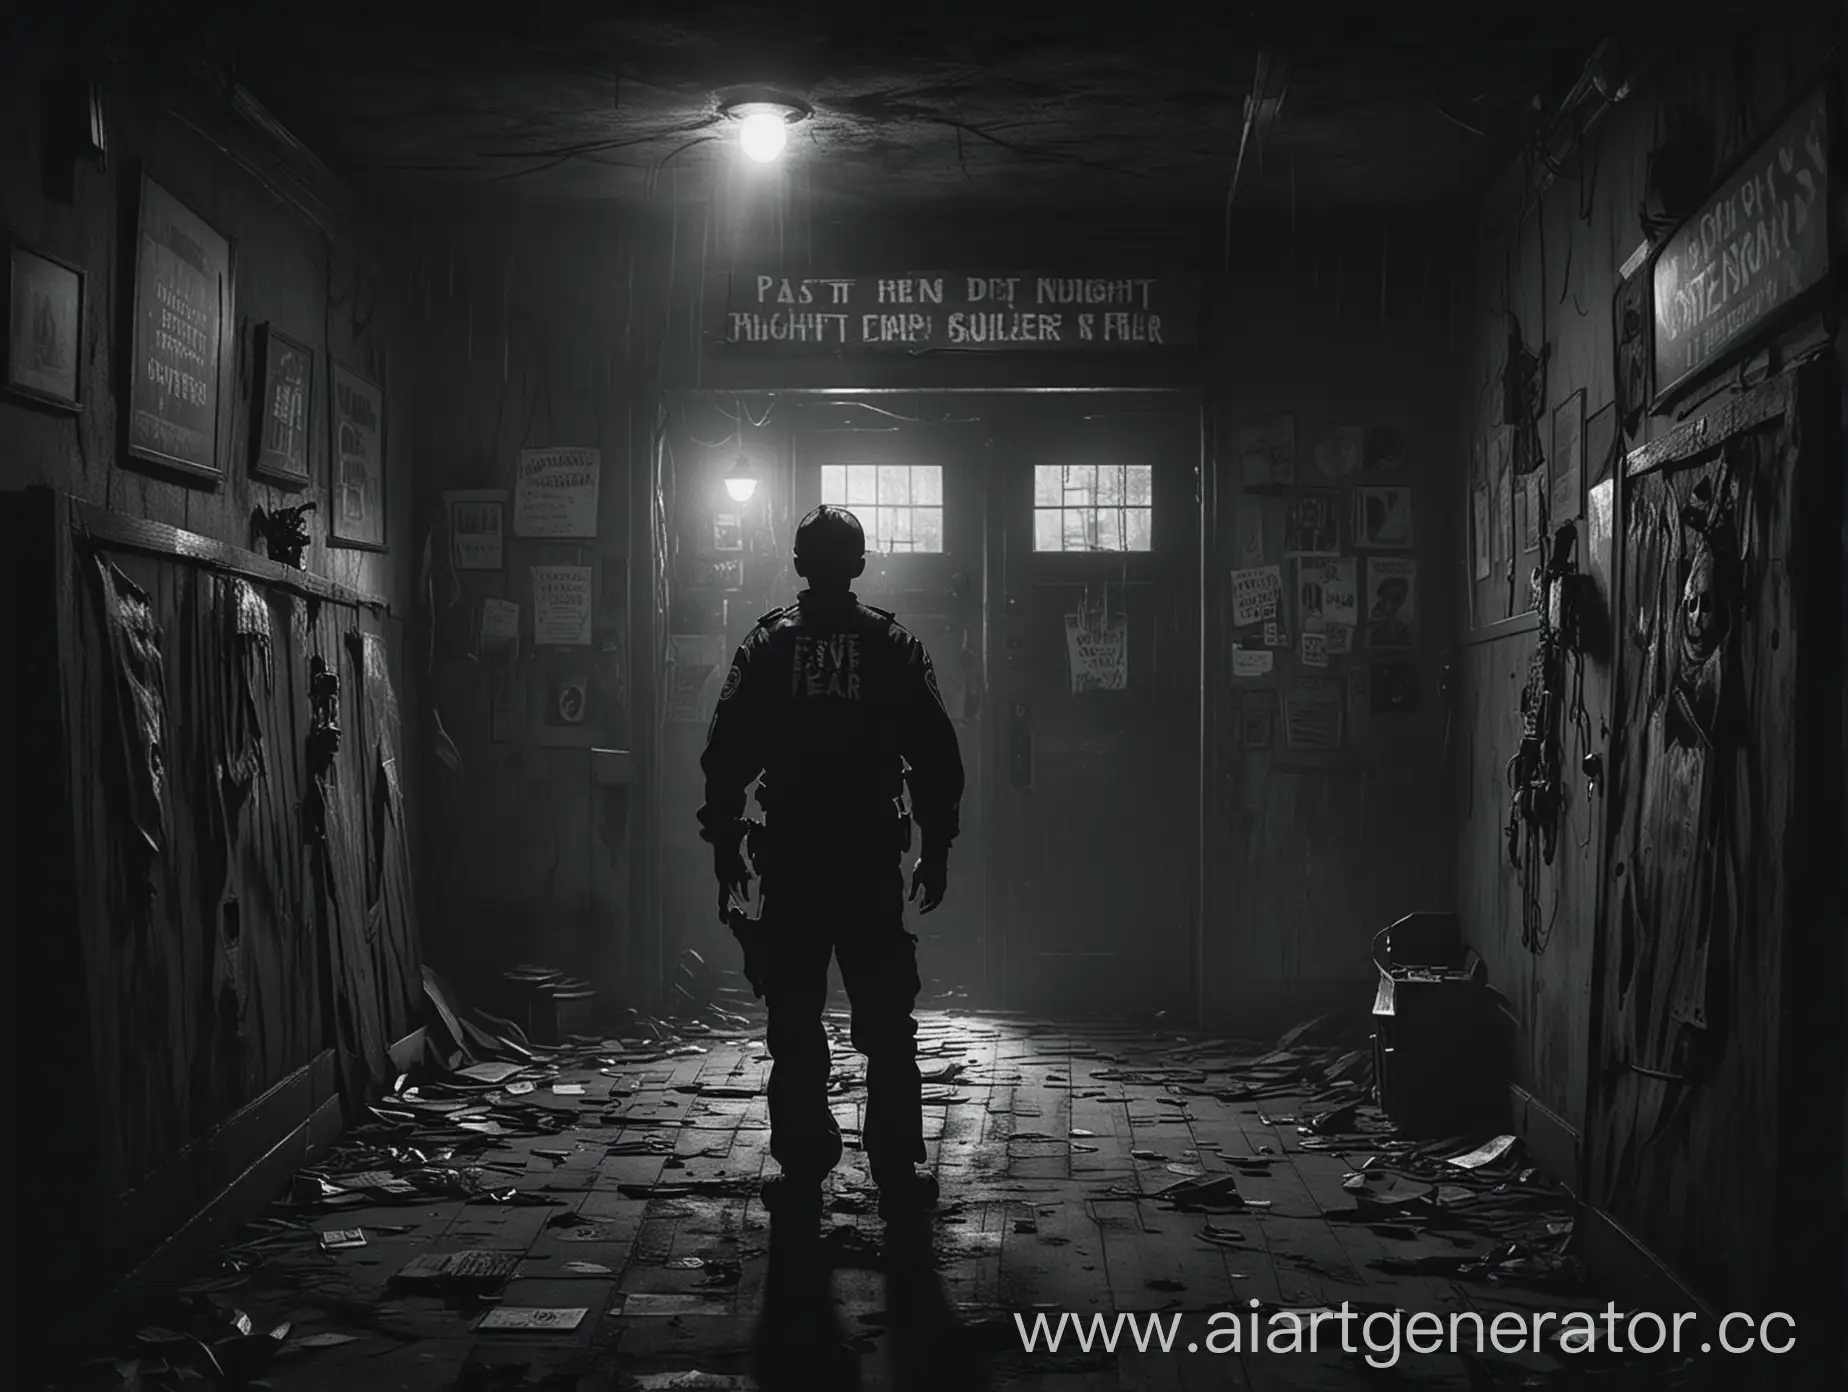 Create an epic, gothic rock-inspired illustration for a song titled "Five Nights of Fear." The image should depict a lone security guard in a dark, eerie control room surrounded by animatronic figures with menacing expressions. The setting should be atmospheric, with flickering lights, shadowy corners, and the glow of security monitors showing the haunted pizzeria. Include subtle details hinting at the haunted history, like ghostly children's faces or faded posters. The overall mood should be intense, foreboding, and cinematic, capturing the essence of the song's narrative and the fear experienced during the night shifts.